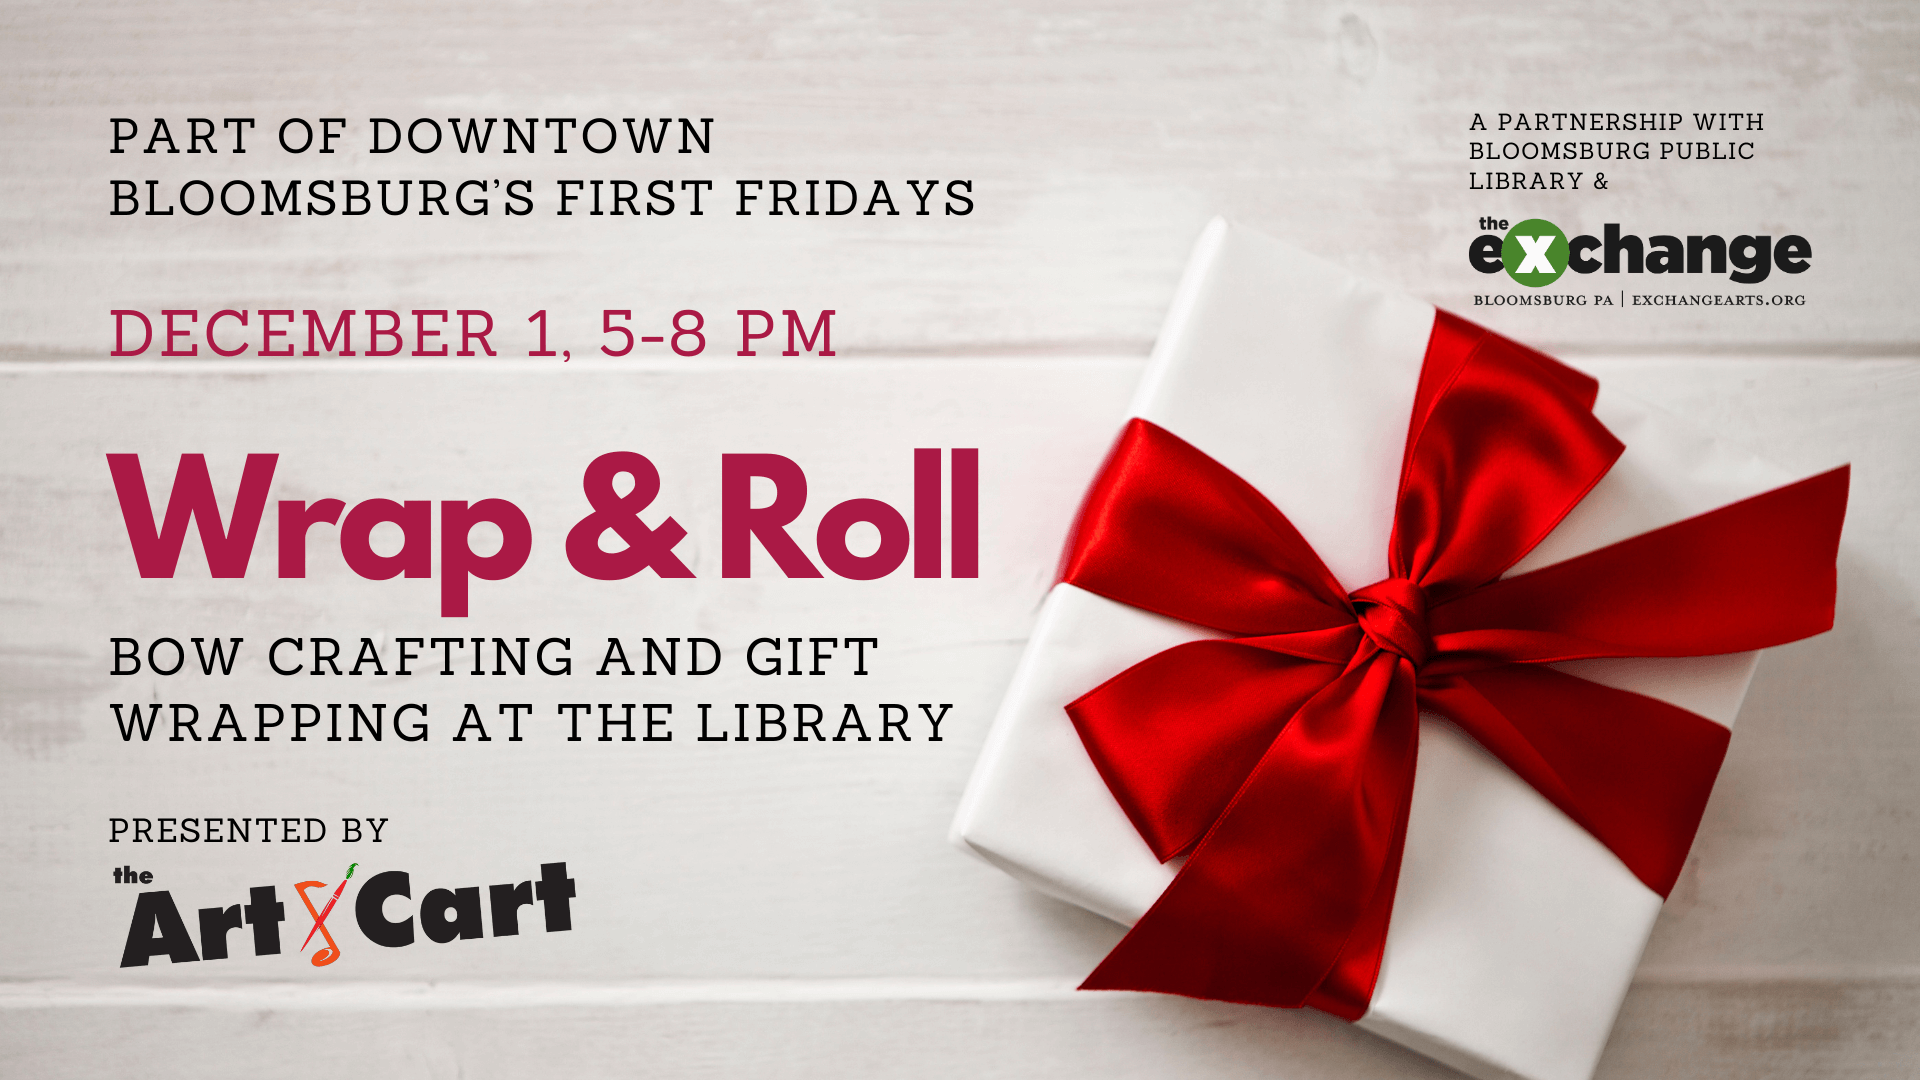 Wrap & Roll: Bow Crafting and Gift Wrapping